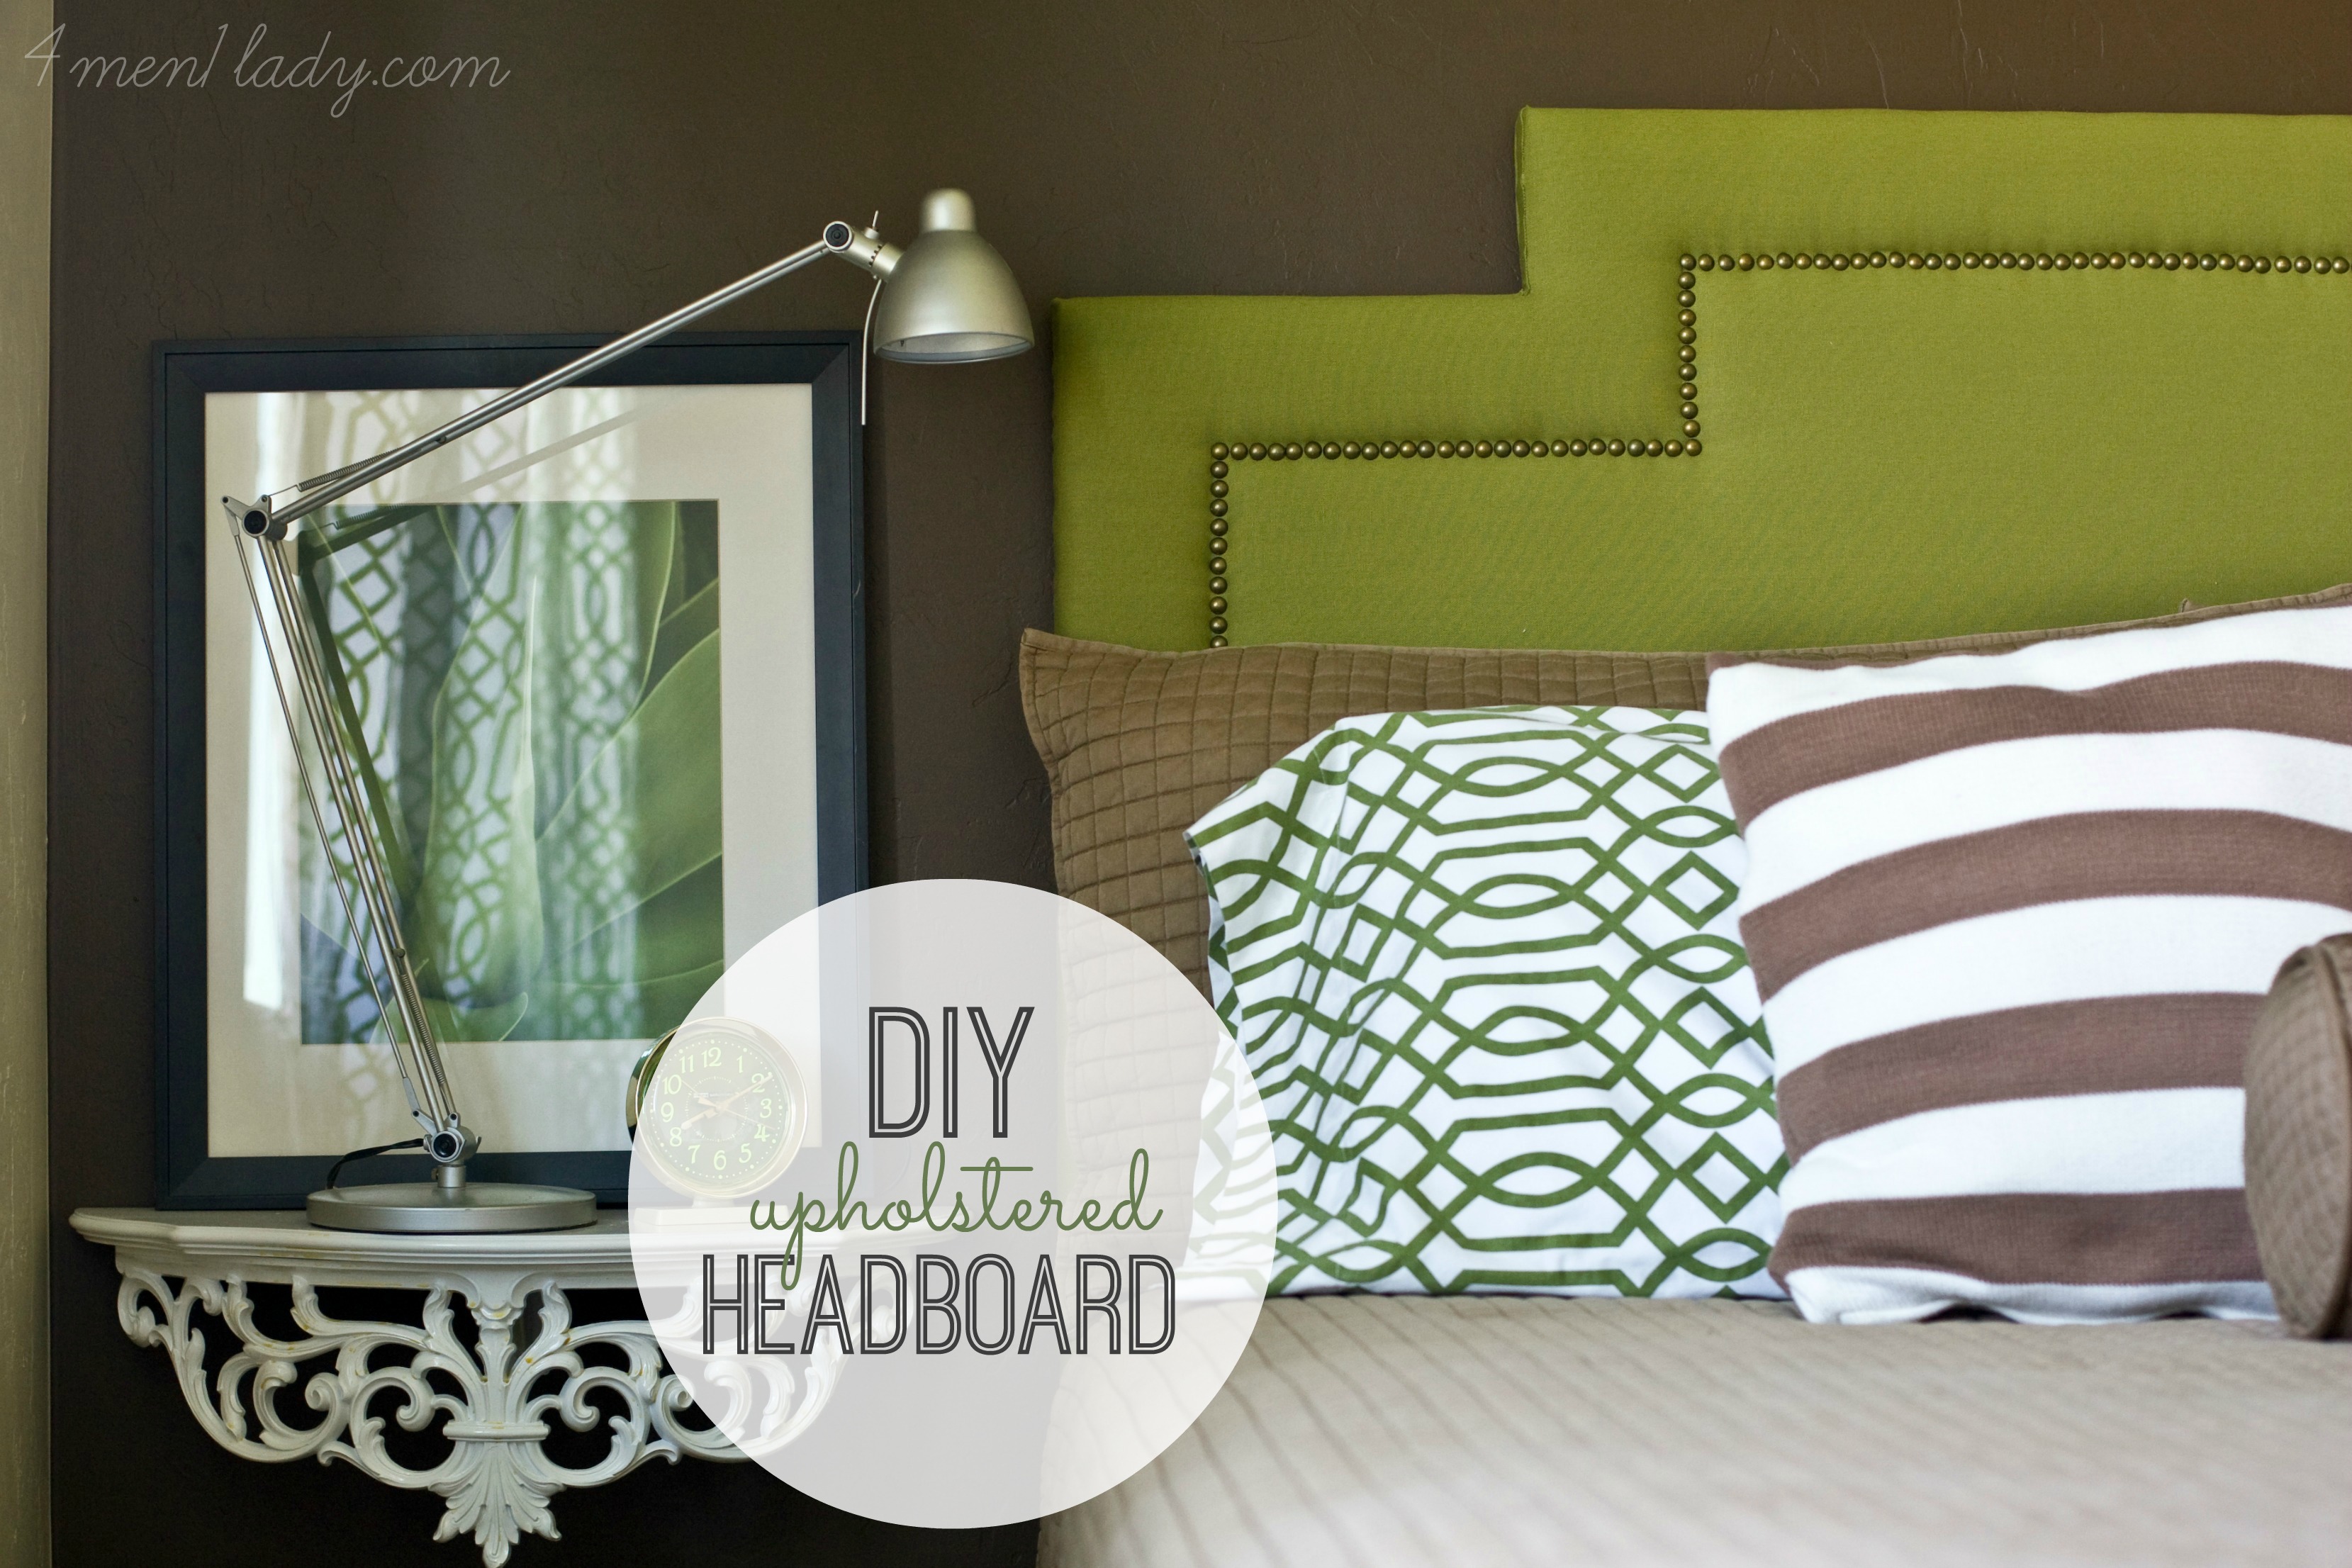 Firm Up Frumpy Sofa Cushions With This Trick